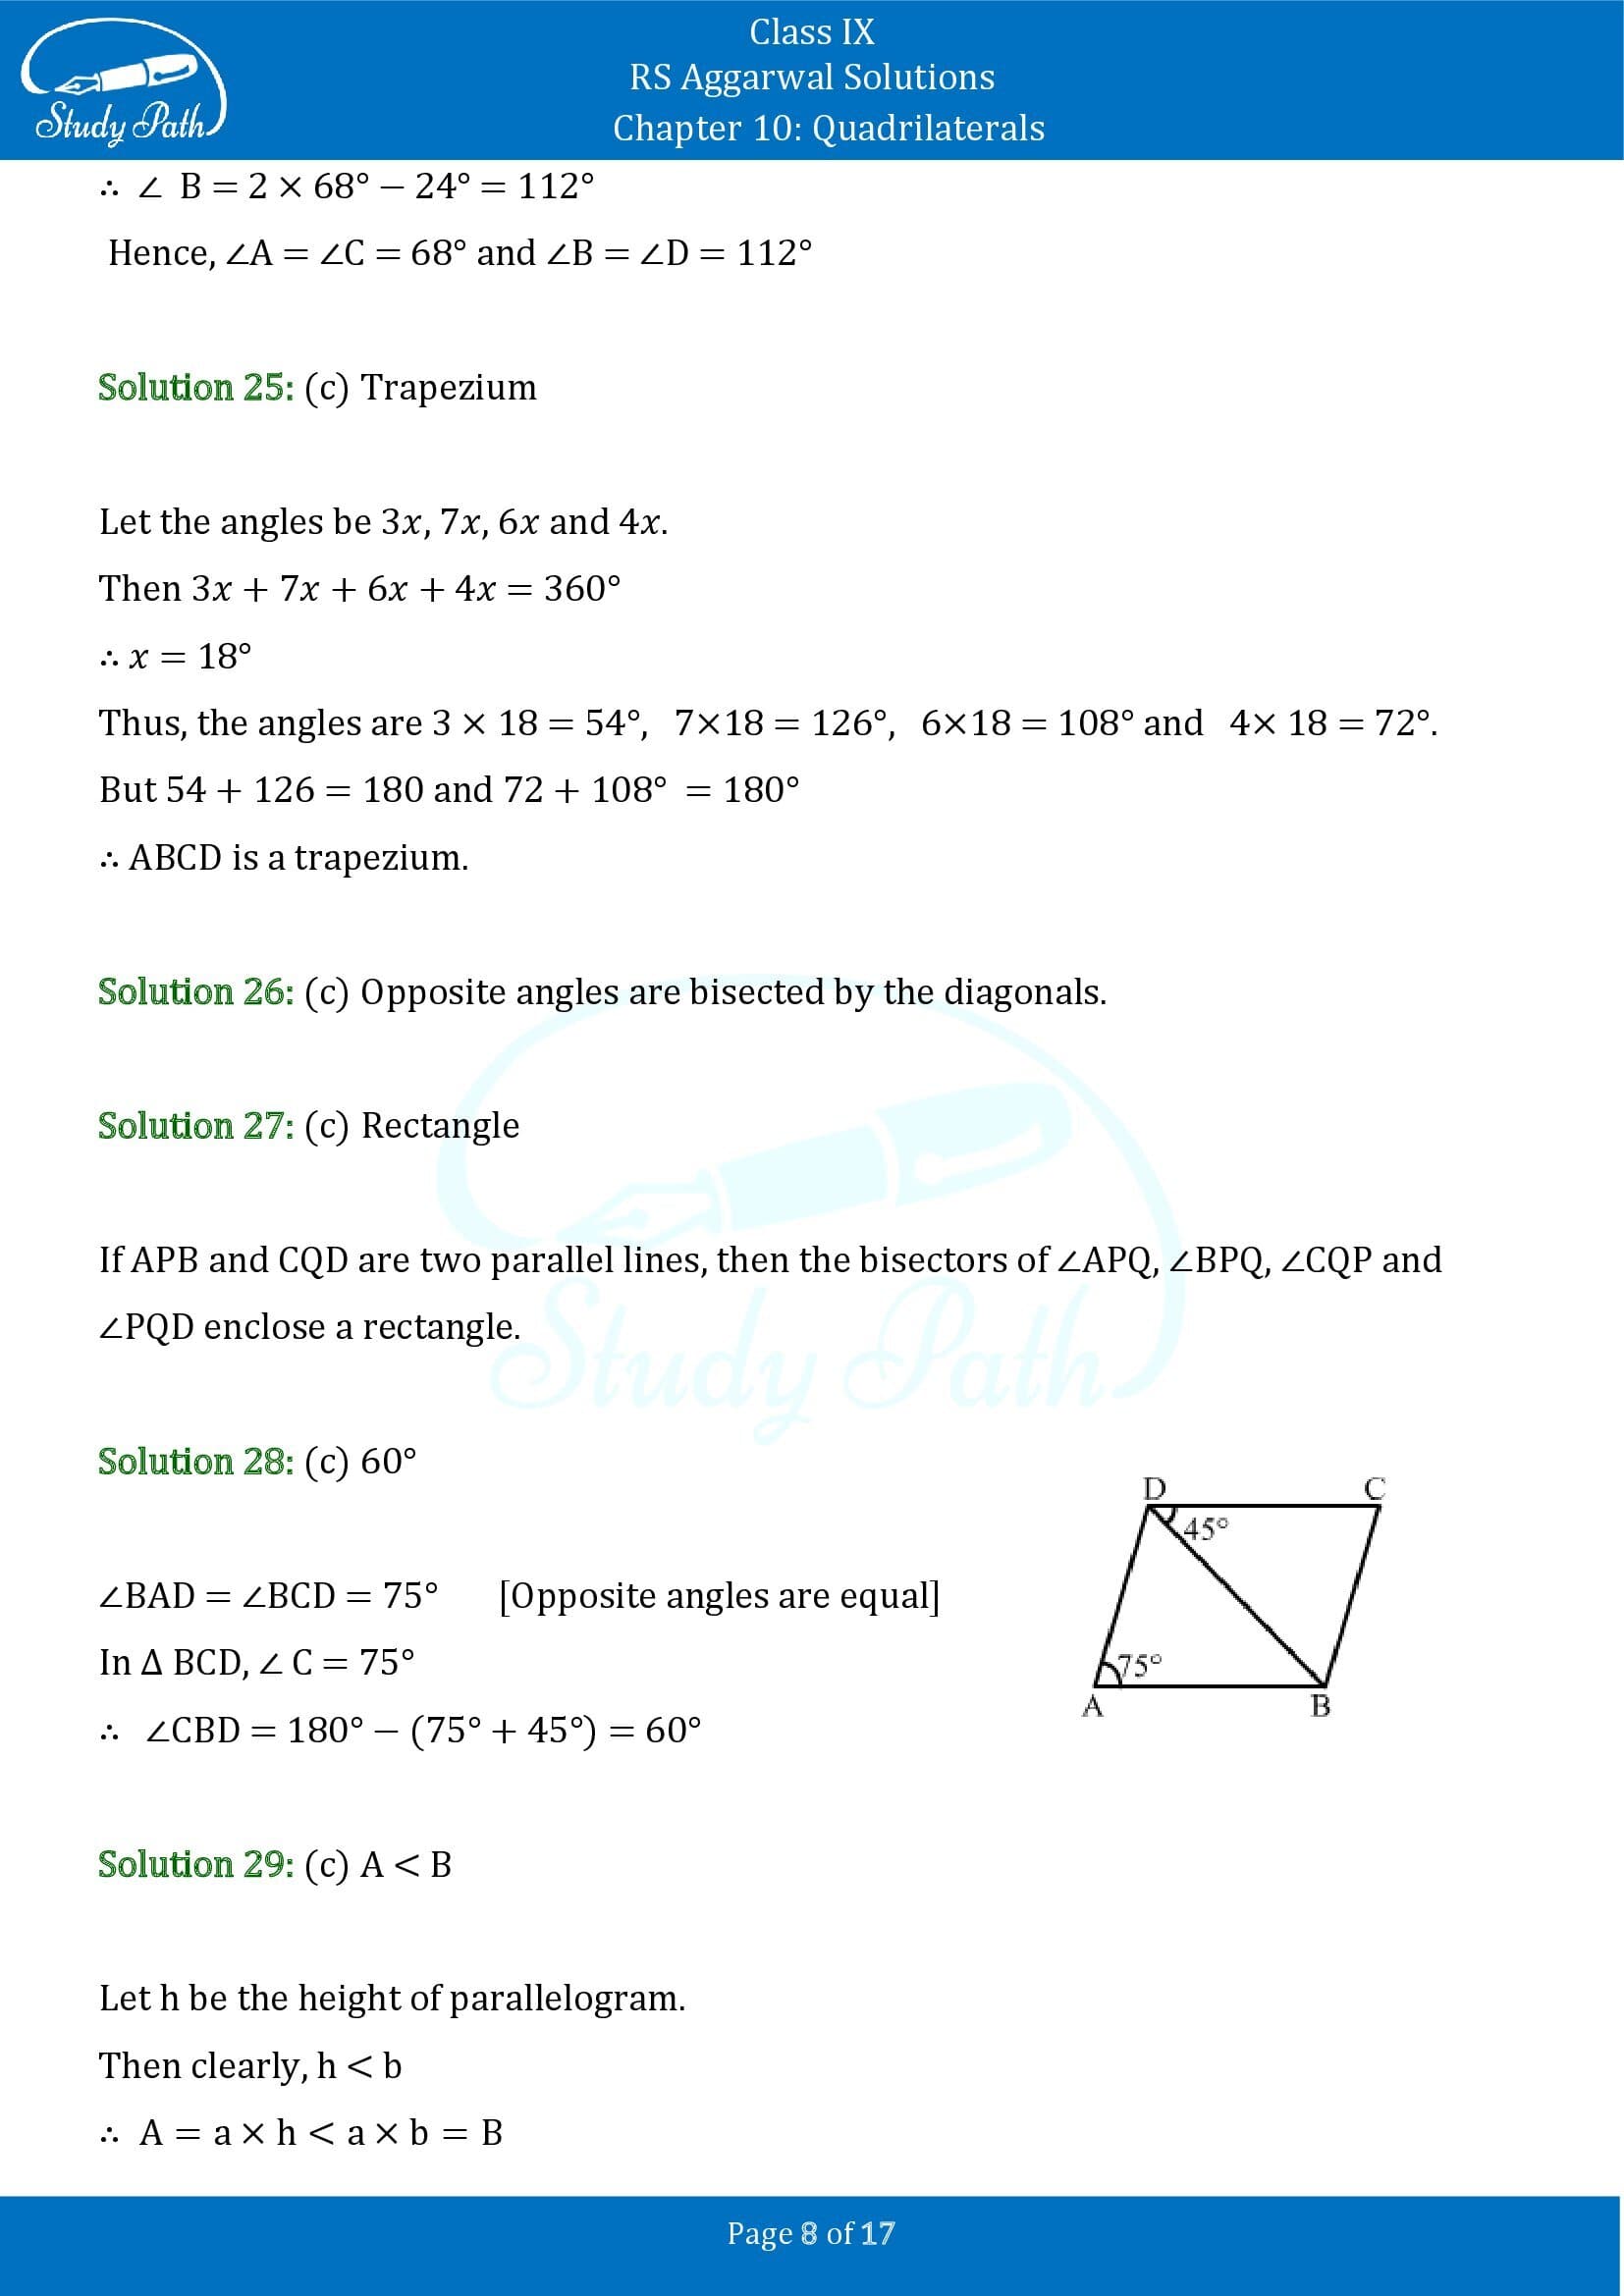 RS Aggarwal Solutions Class 9 Chapter 10 Quadrilaterals Multiple Choice Questions MCQs 00008